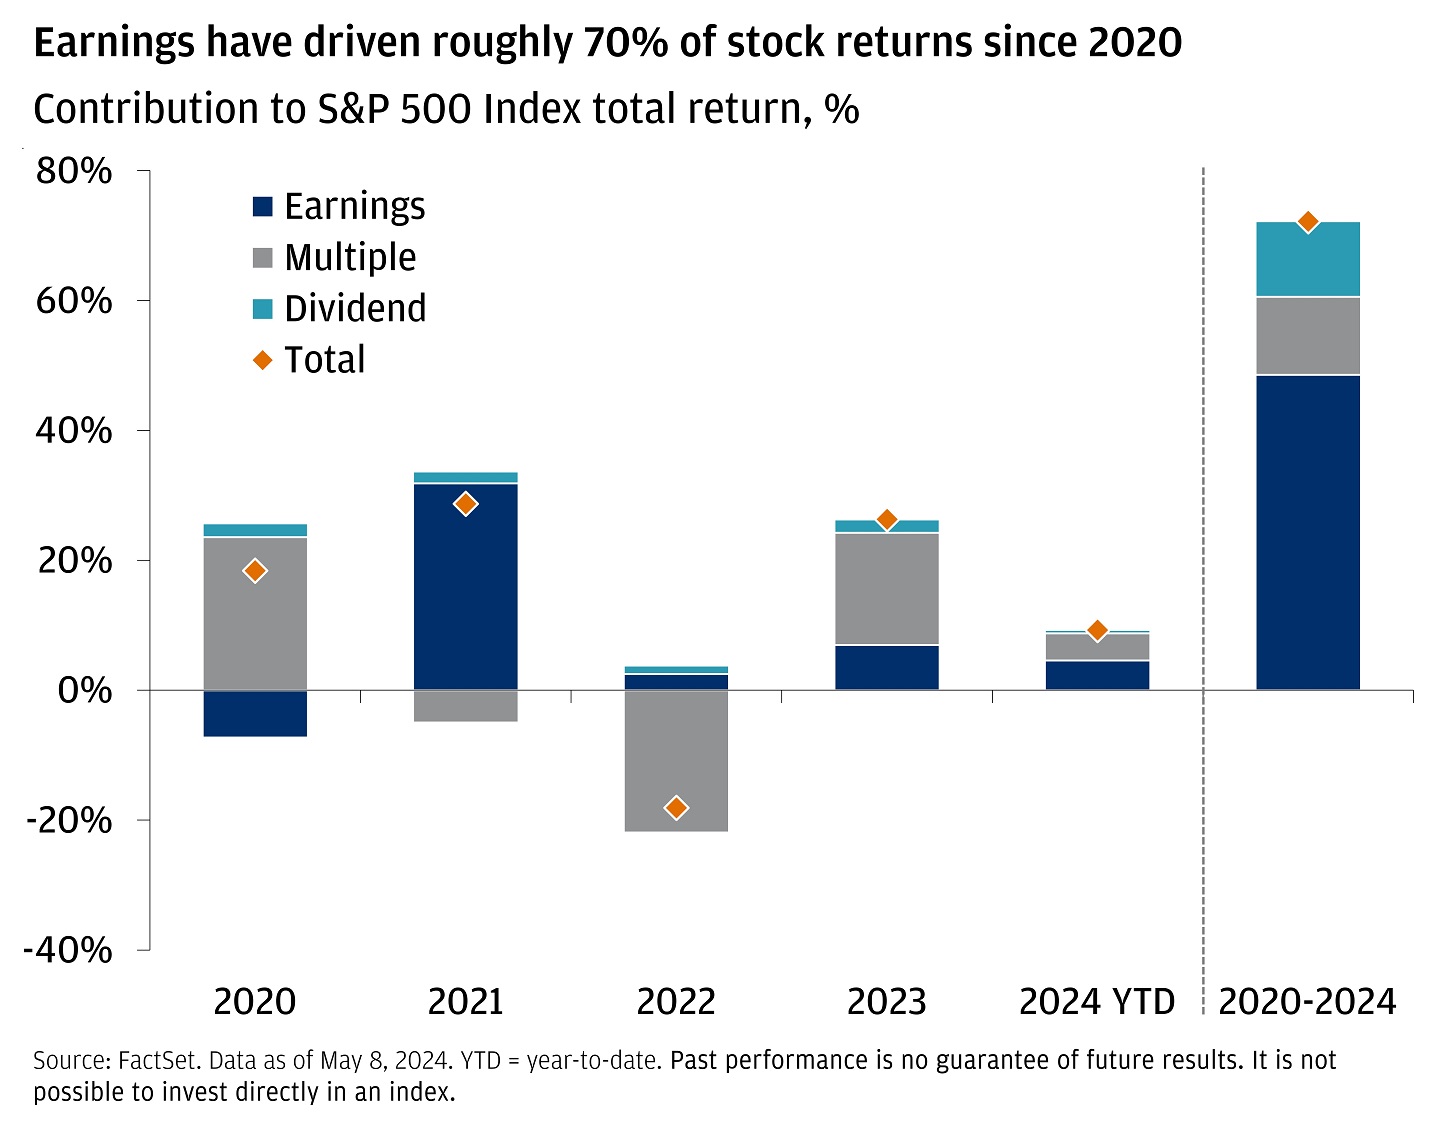 This chart shows the contribution to the S&P 500 Index total return from 2020 to 2024 year-to-date.